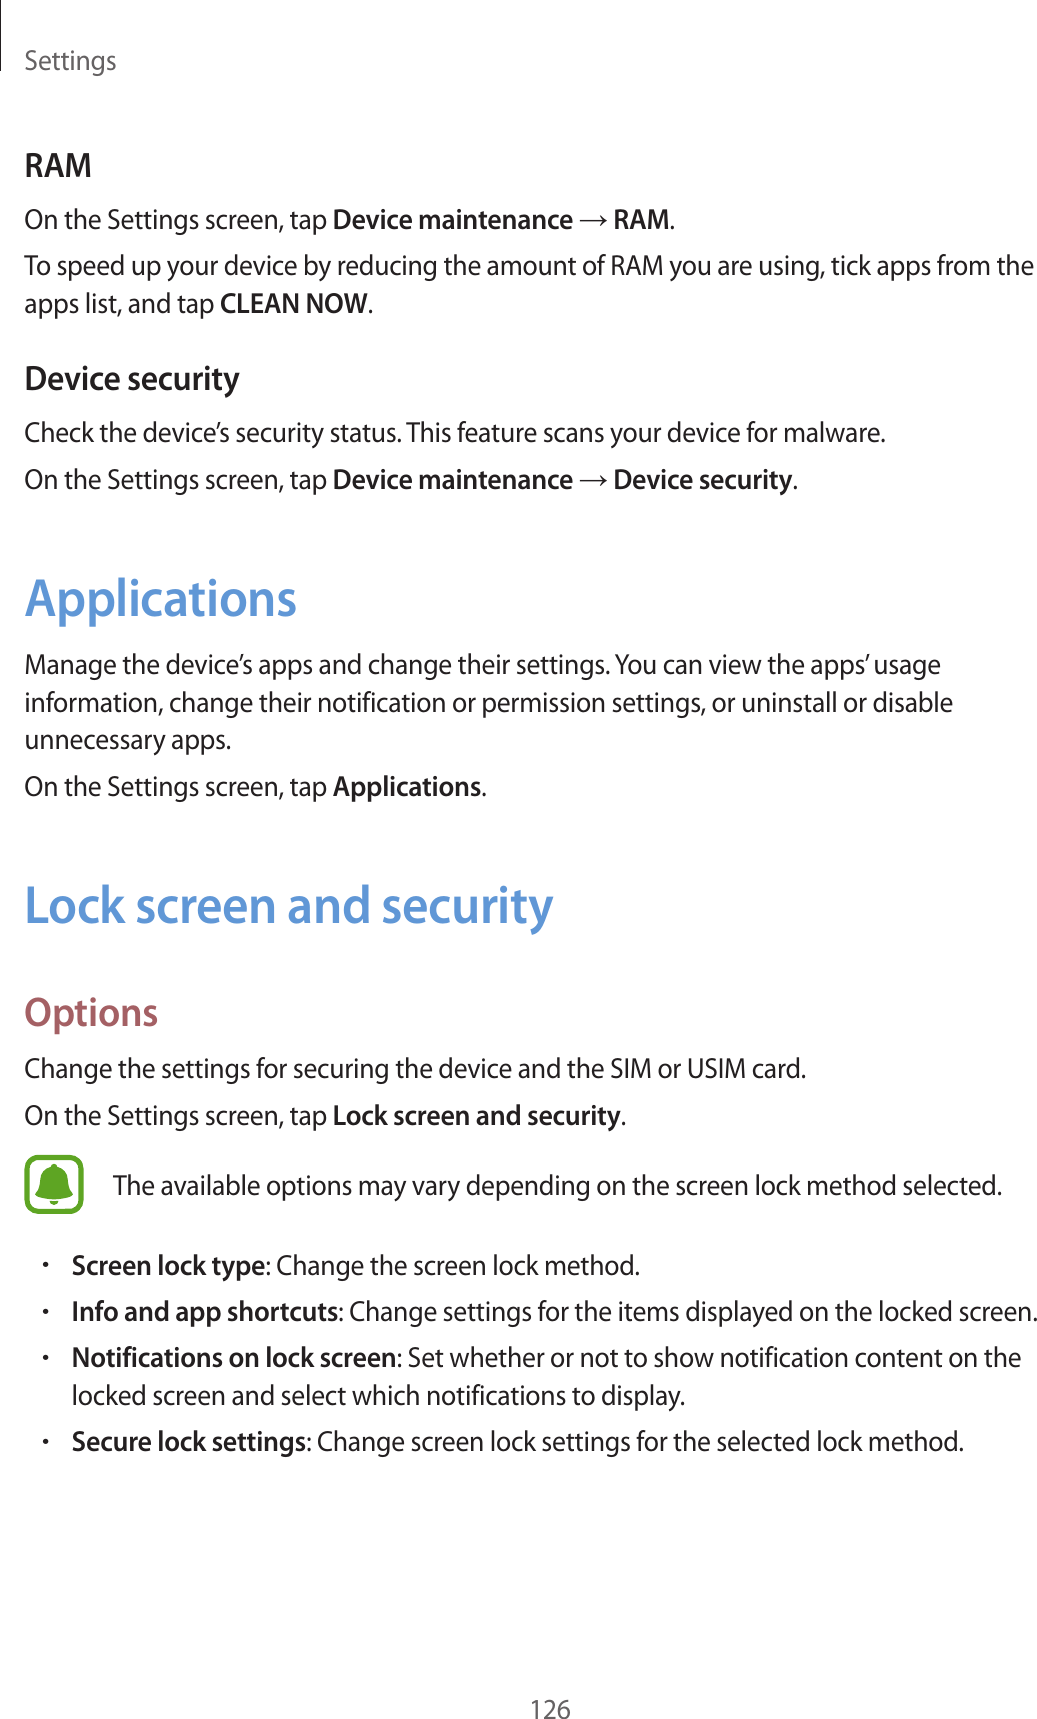 Settings126RAMOn the Settings screen, tap Device maintenance → RAM.To speed up your device by reducing the amount of RAM you are using, tick apps from the apps list, and tap CLEAN NOW.Device securityCheck the device’s security status. This feature scans your device for malware.On the Settings screen, tap Device maintenance → Device security.ApplicationsManage the device’s apps and change their settings. You can view the apps’ usage information, change their notification or permission settings, or uninstall or disable unnecessary apps.On the Settings screen, tap Applications.Lock screen and securityOptionsChange the settings for securing the device and the SIM or USIM card.On the Settings screen, tap Lock screen and security.The available options may vary depending on the screen lock method selected.•Screen lock type: Change the screen lock method.•Info and app shortcuts: Change settings for the items displayed on the locked screen.•Notifications on lock screen: Set whether or not to show notification content on the locked screen and select which notifications to display.•Secure lock settings: Change screen lock settings for the selected lock method.